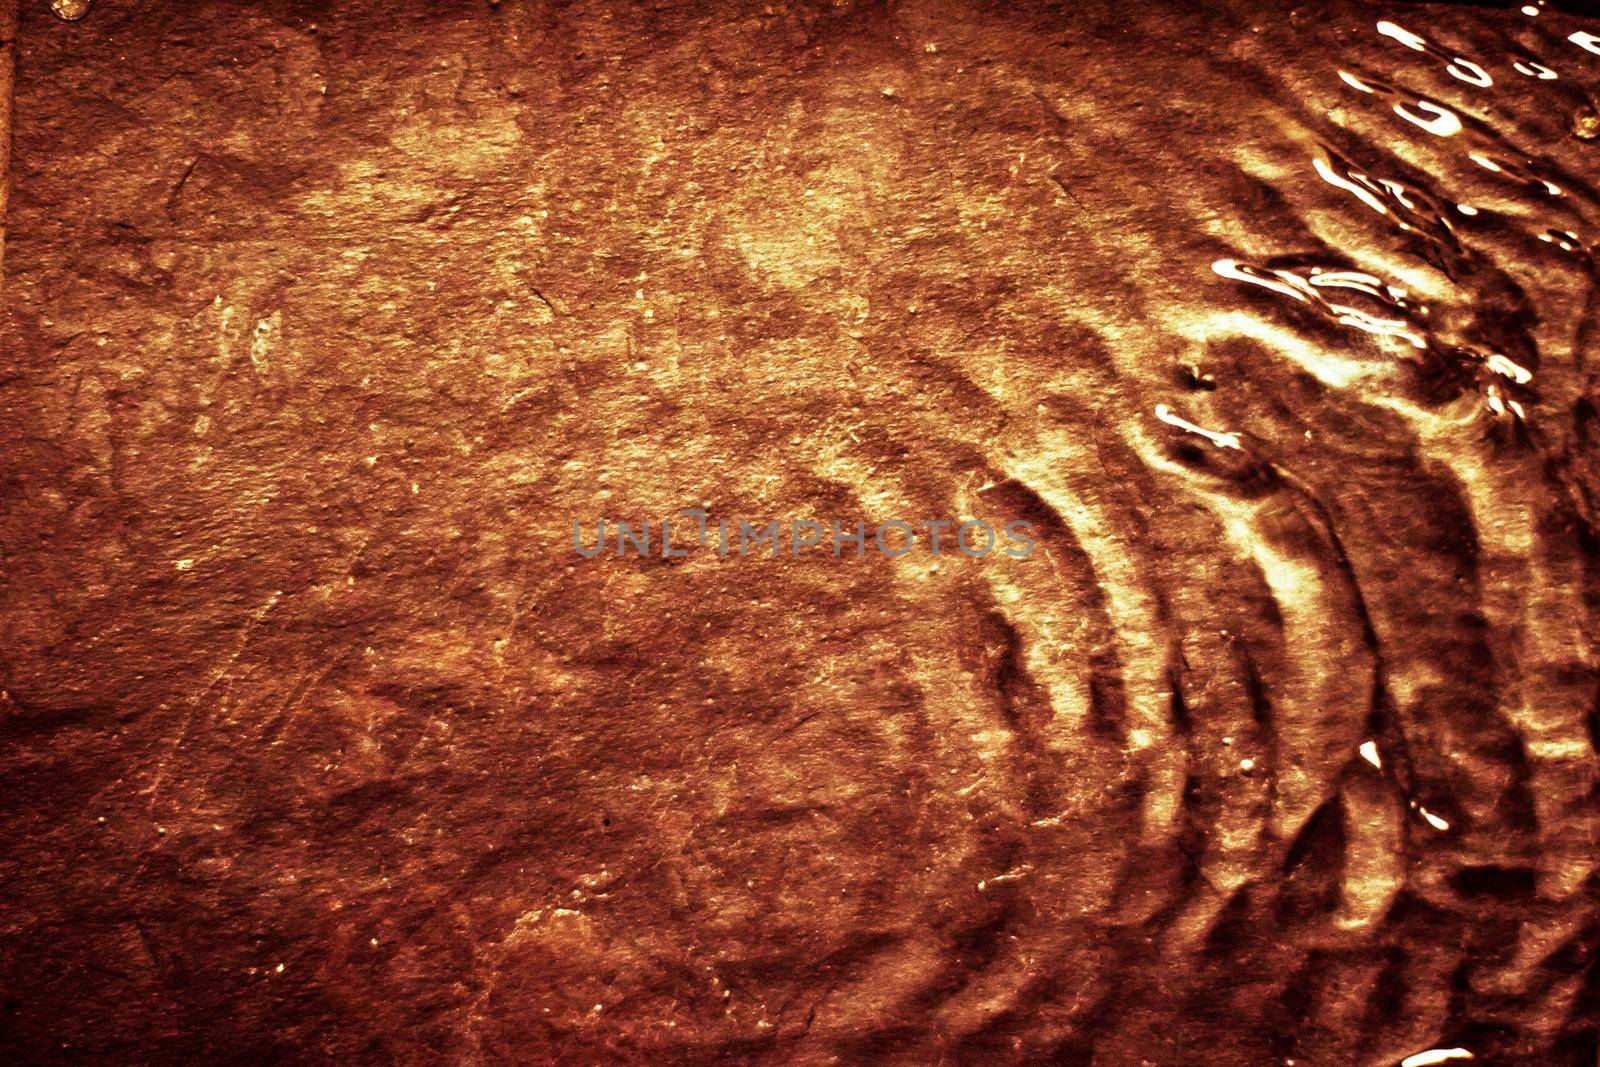 Flowing liquid on gold surface - luxury background and abstract design concept. Golden source